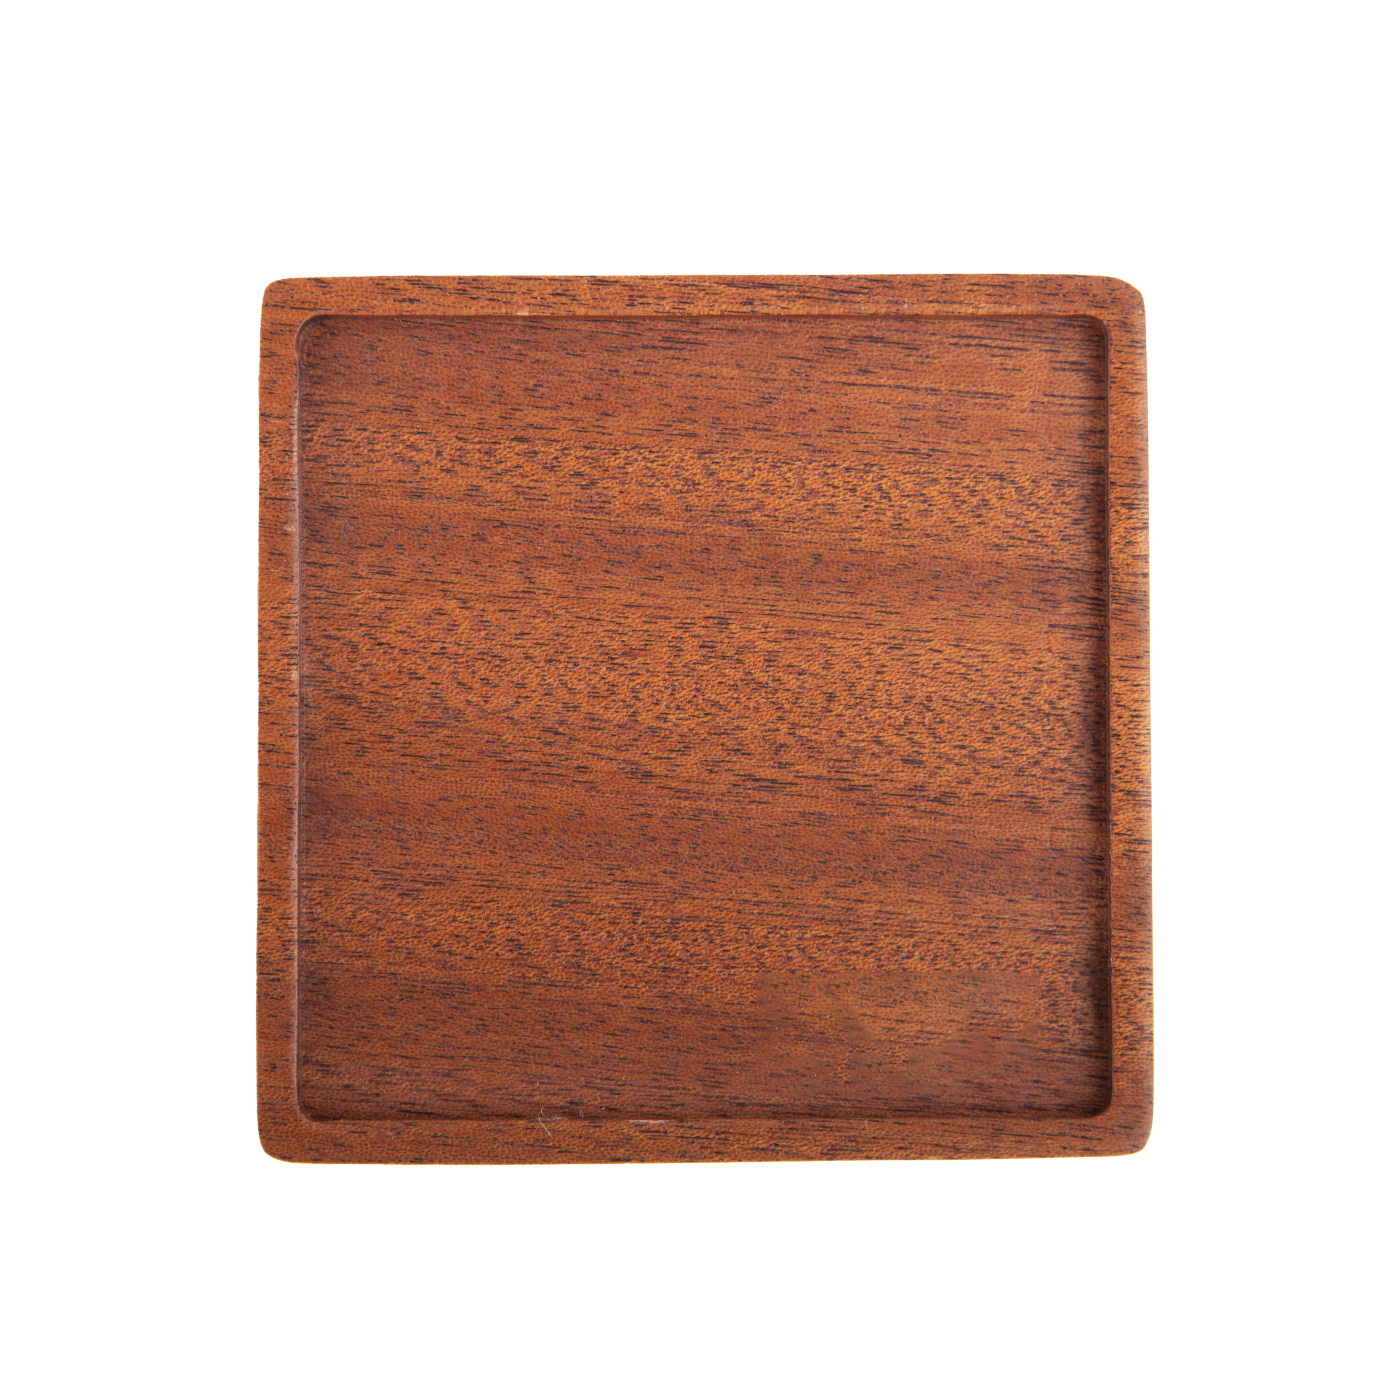 Wood Pad For Cup With Groove